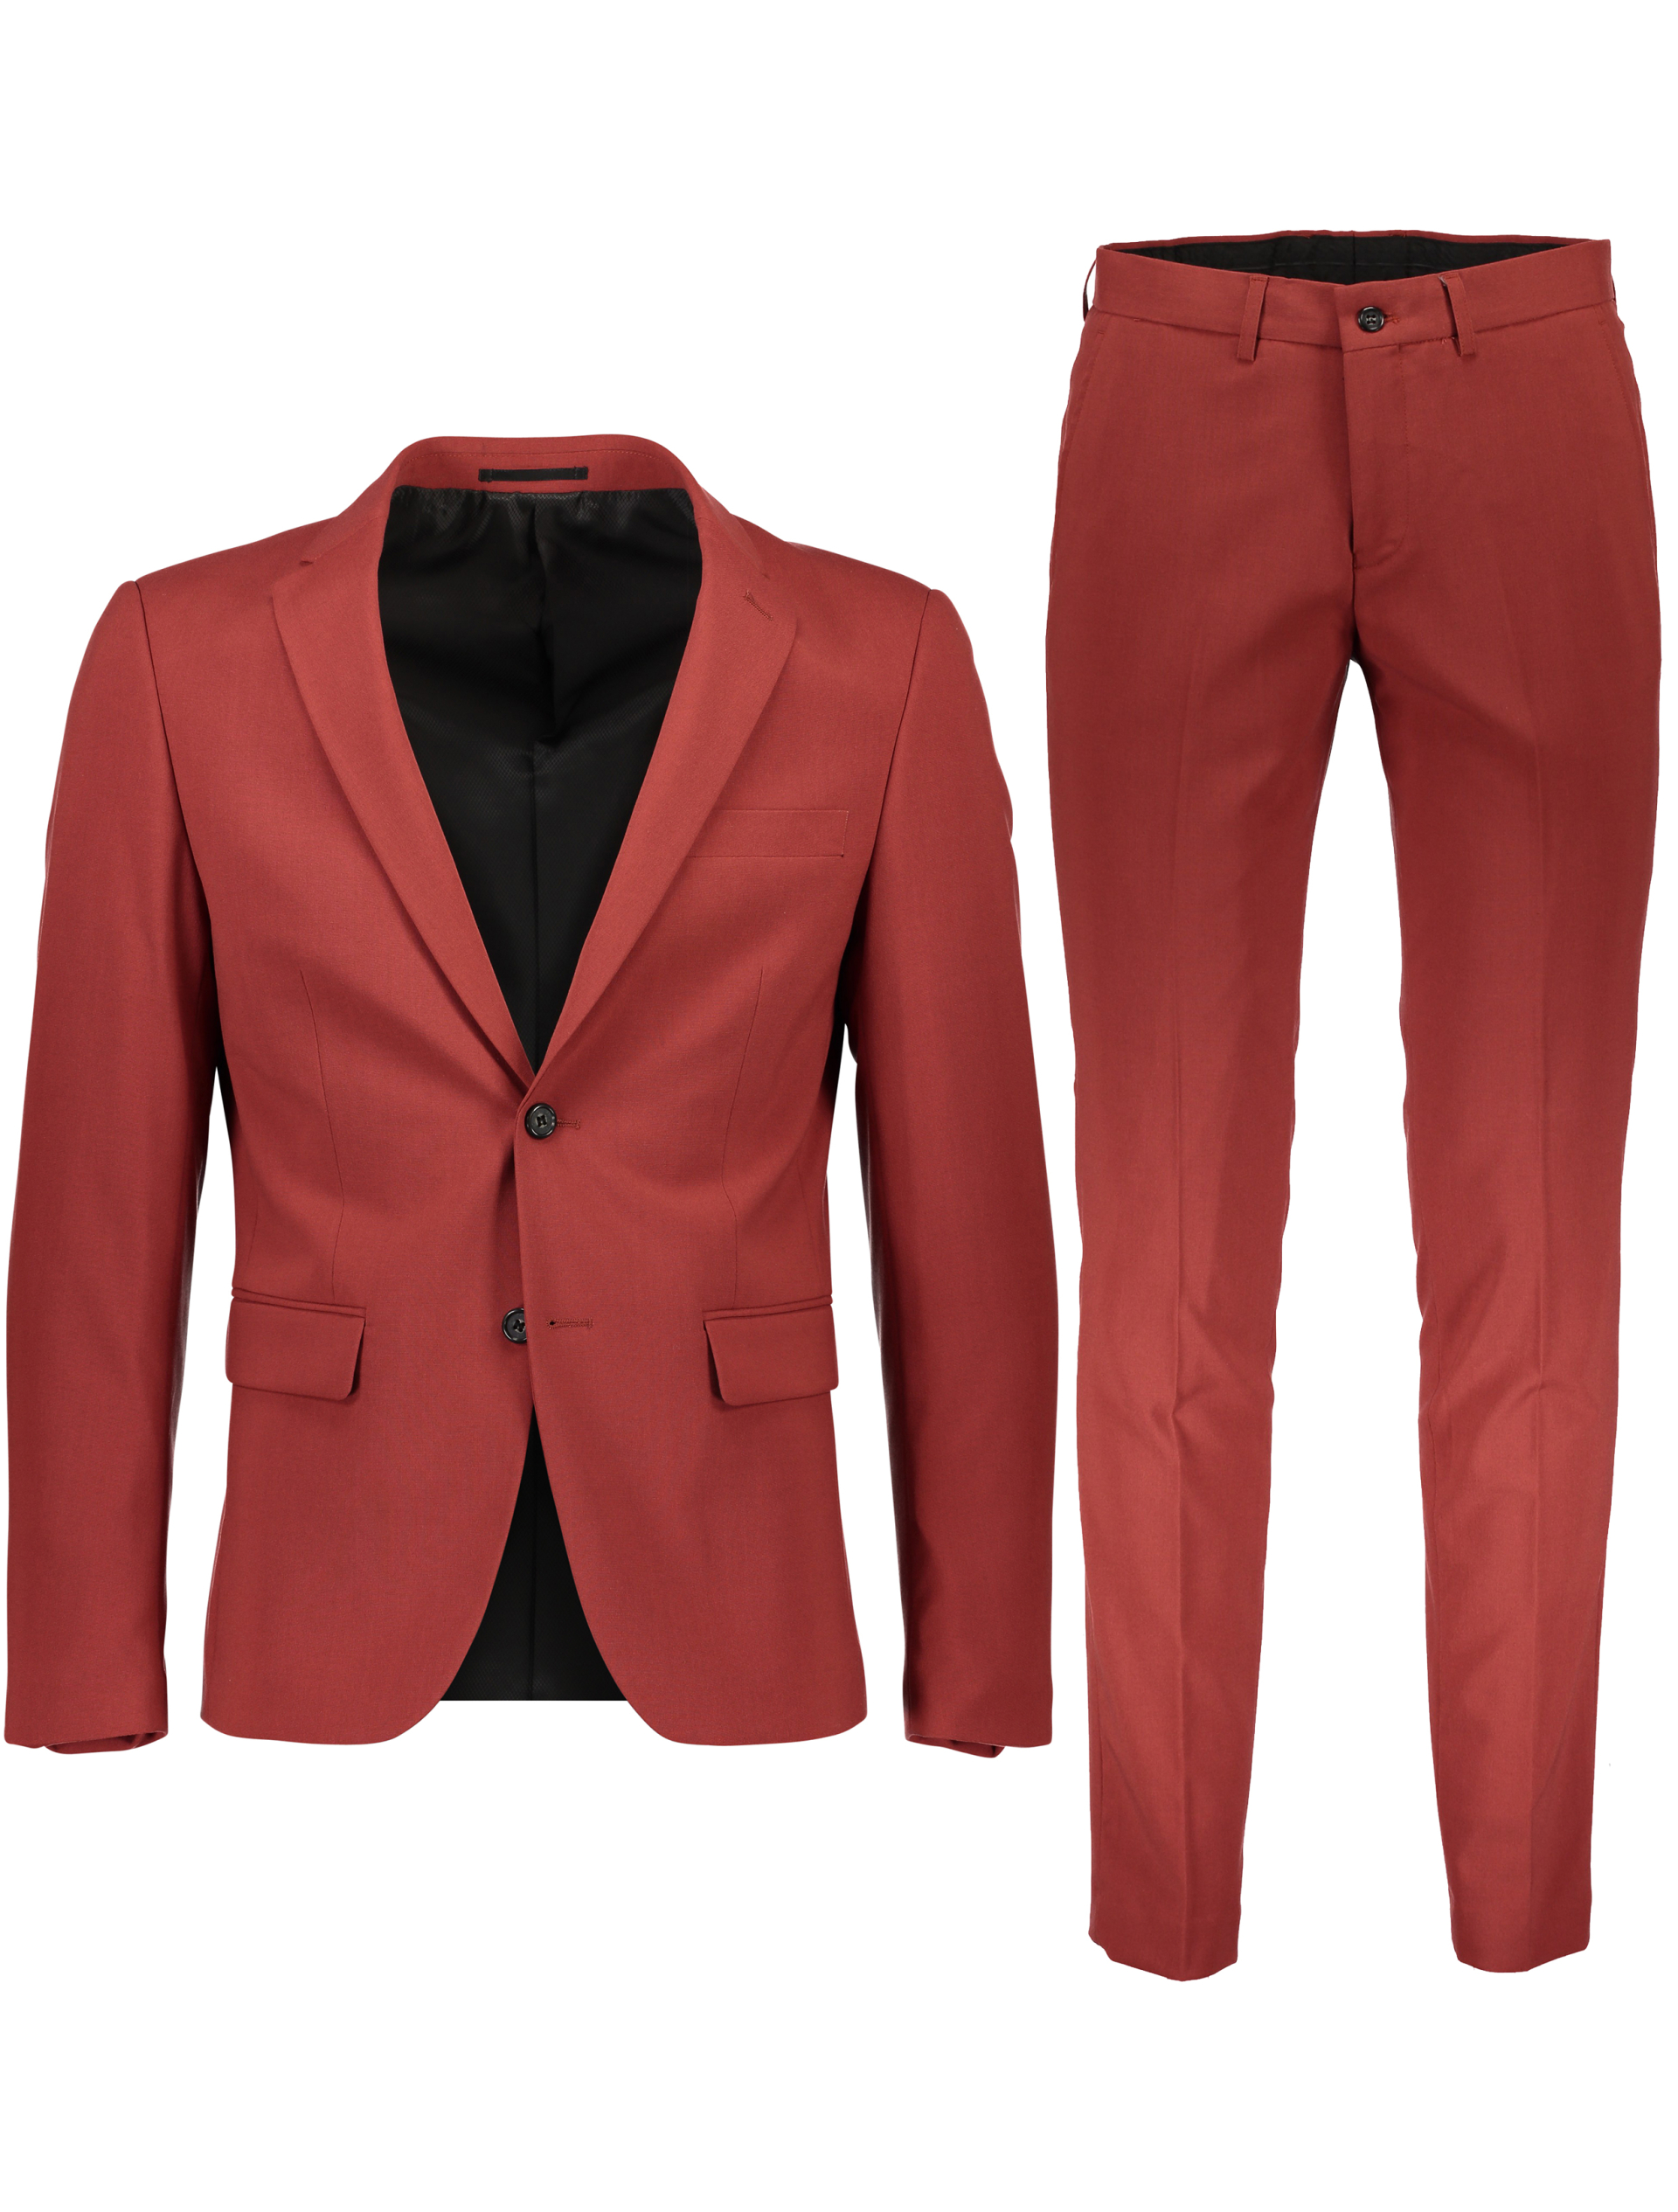 Lindbergh Suit red / dk red